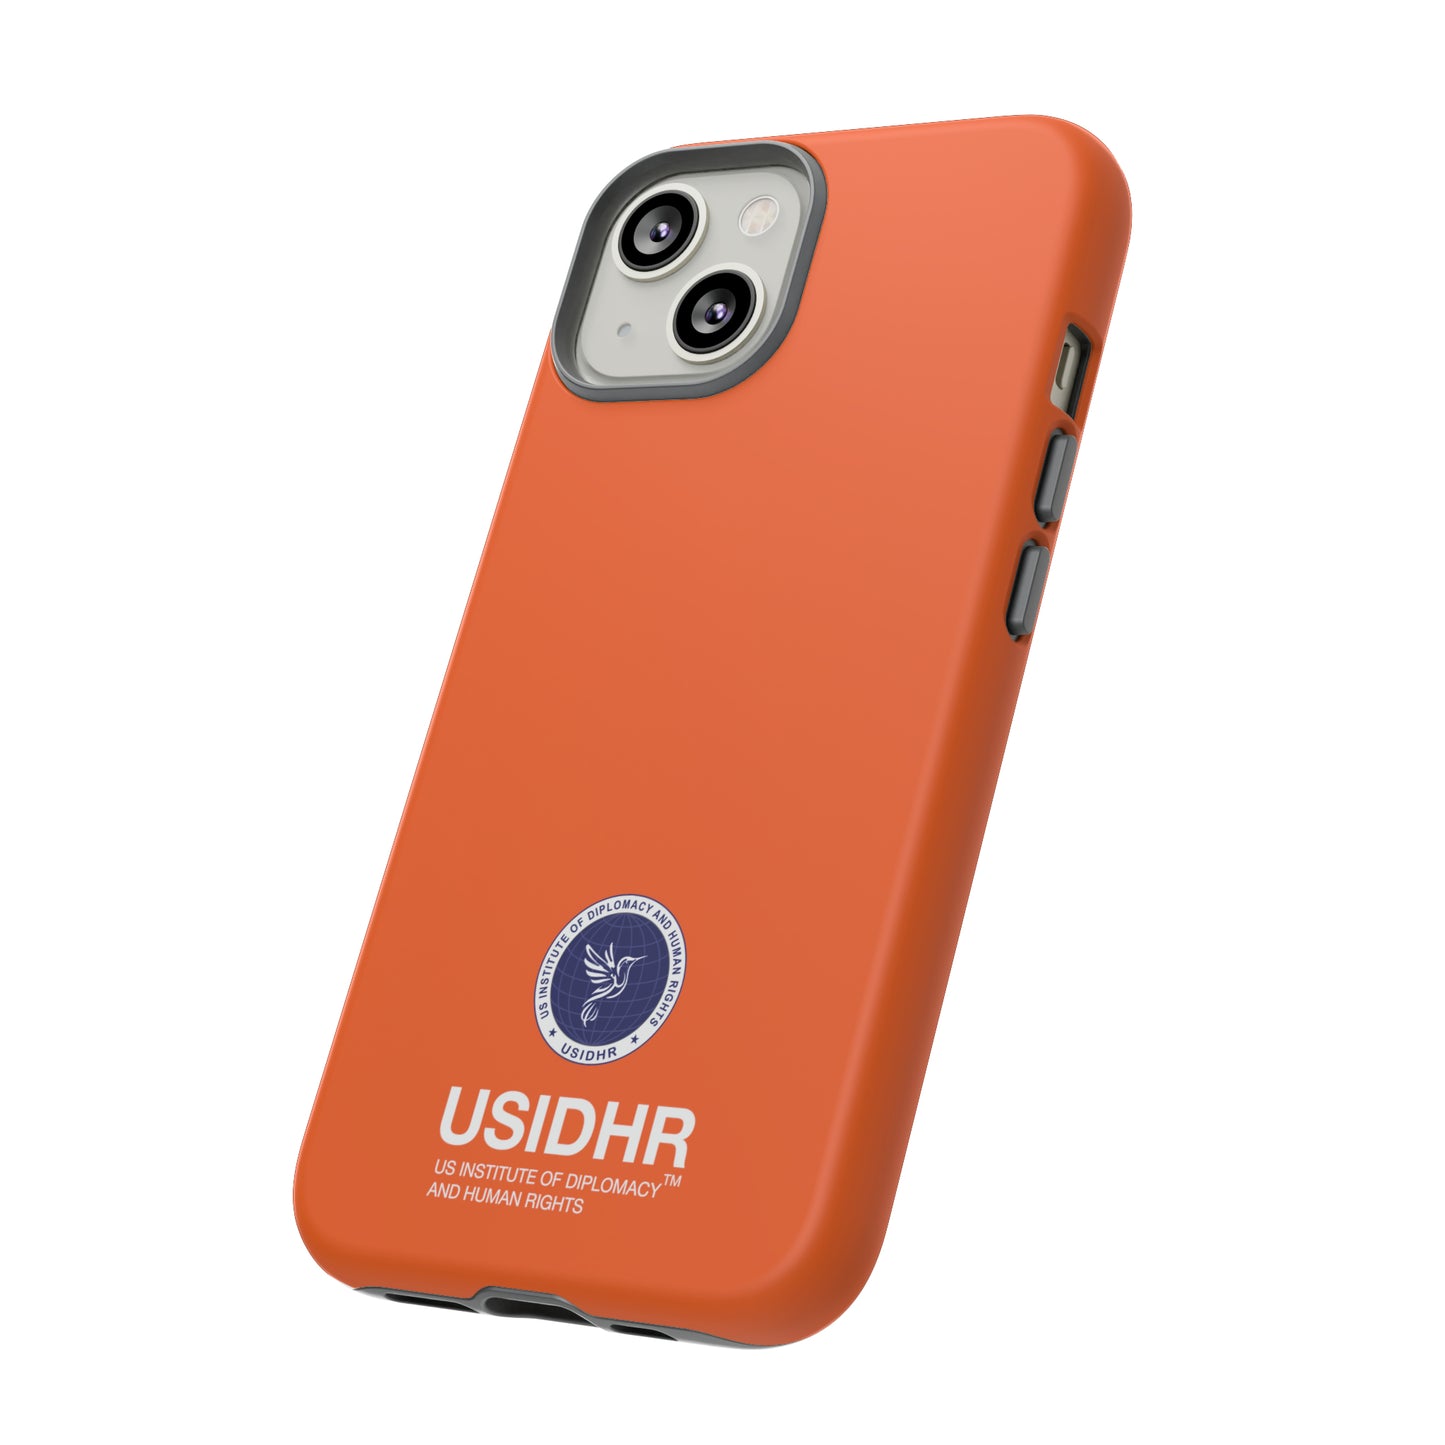 USIDHR Phone Case (compatible with iPhone, Samsung, Google models)